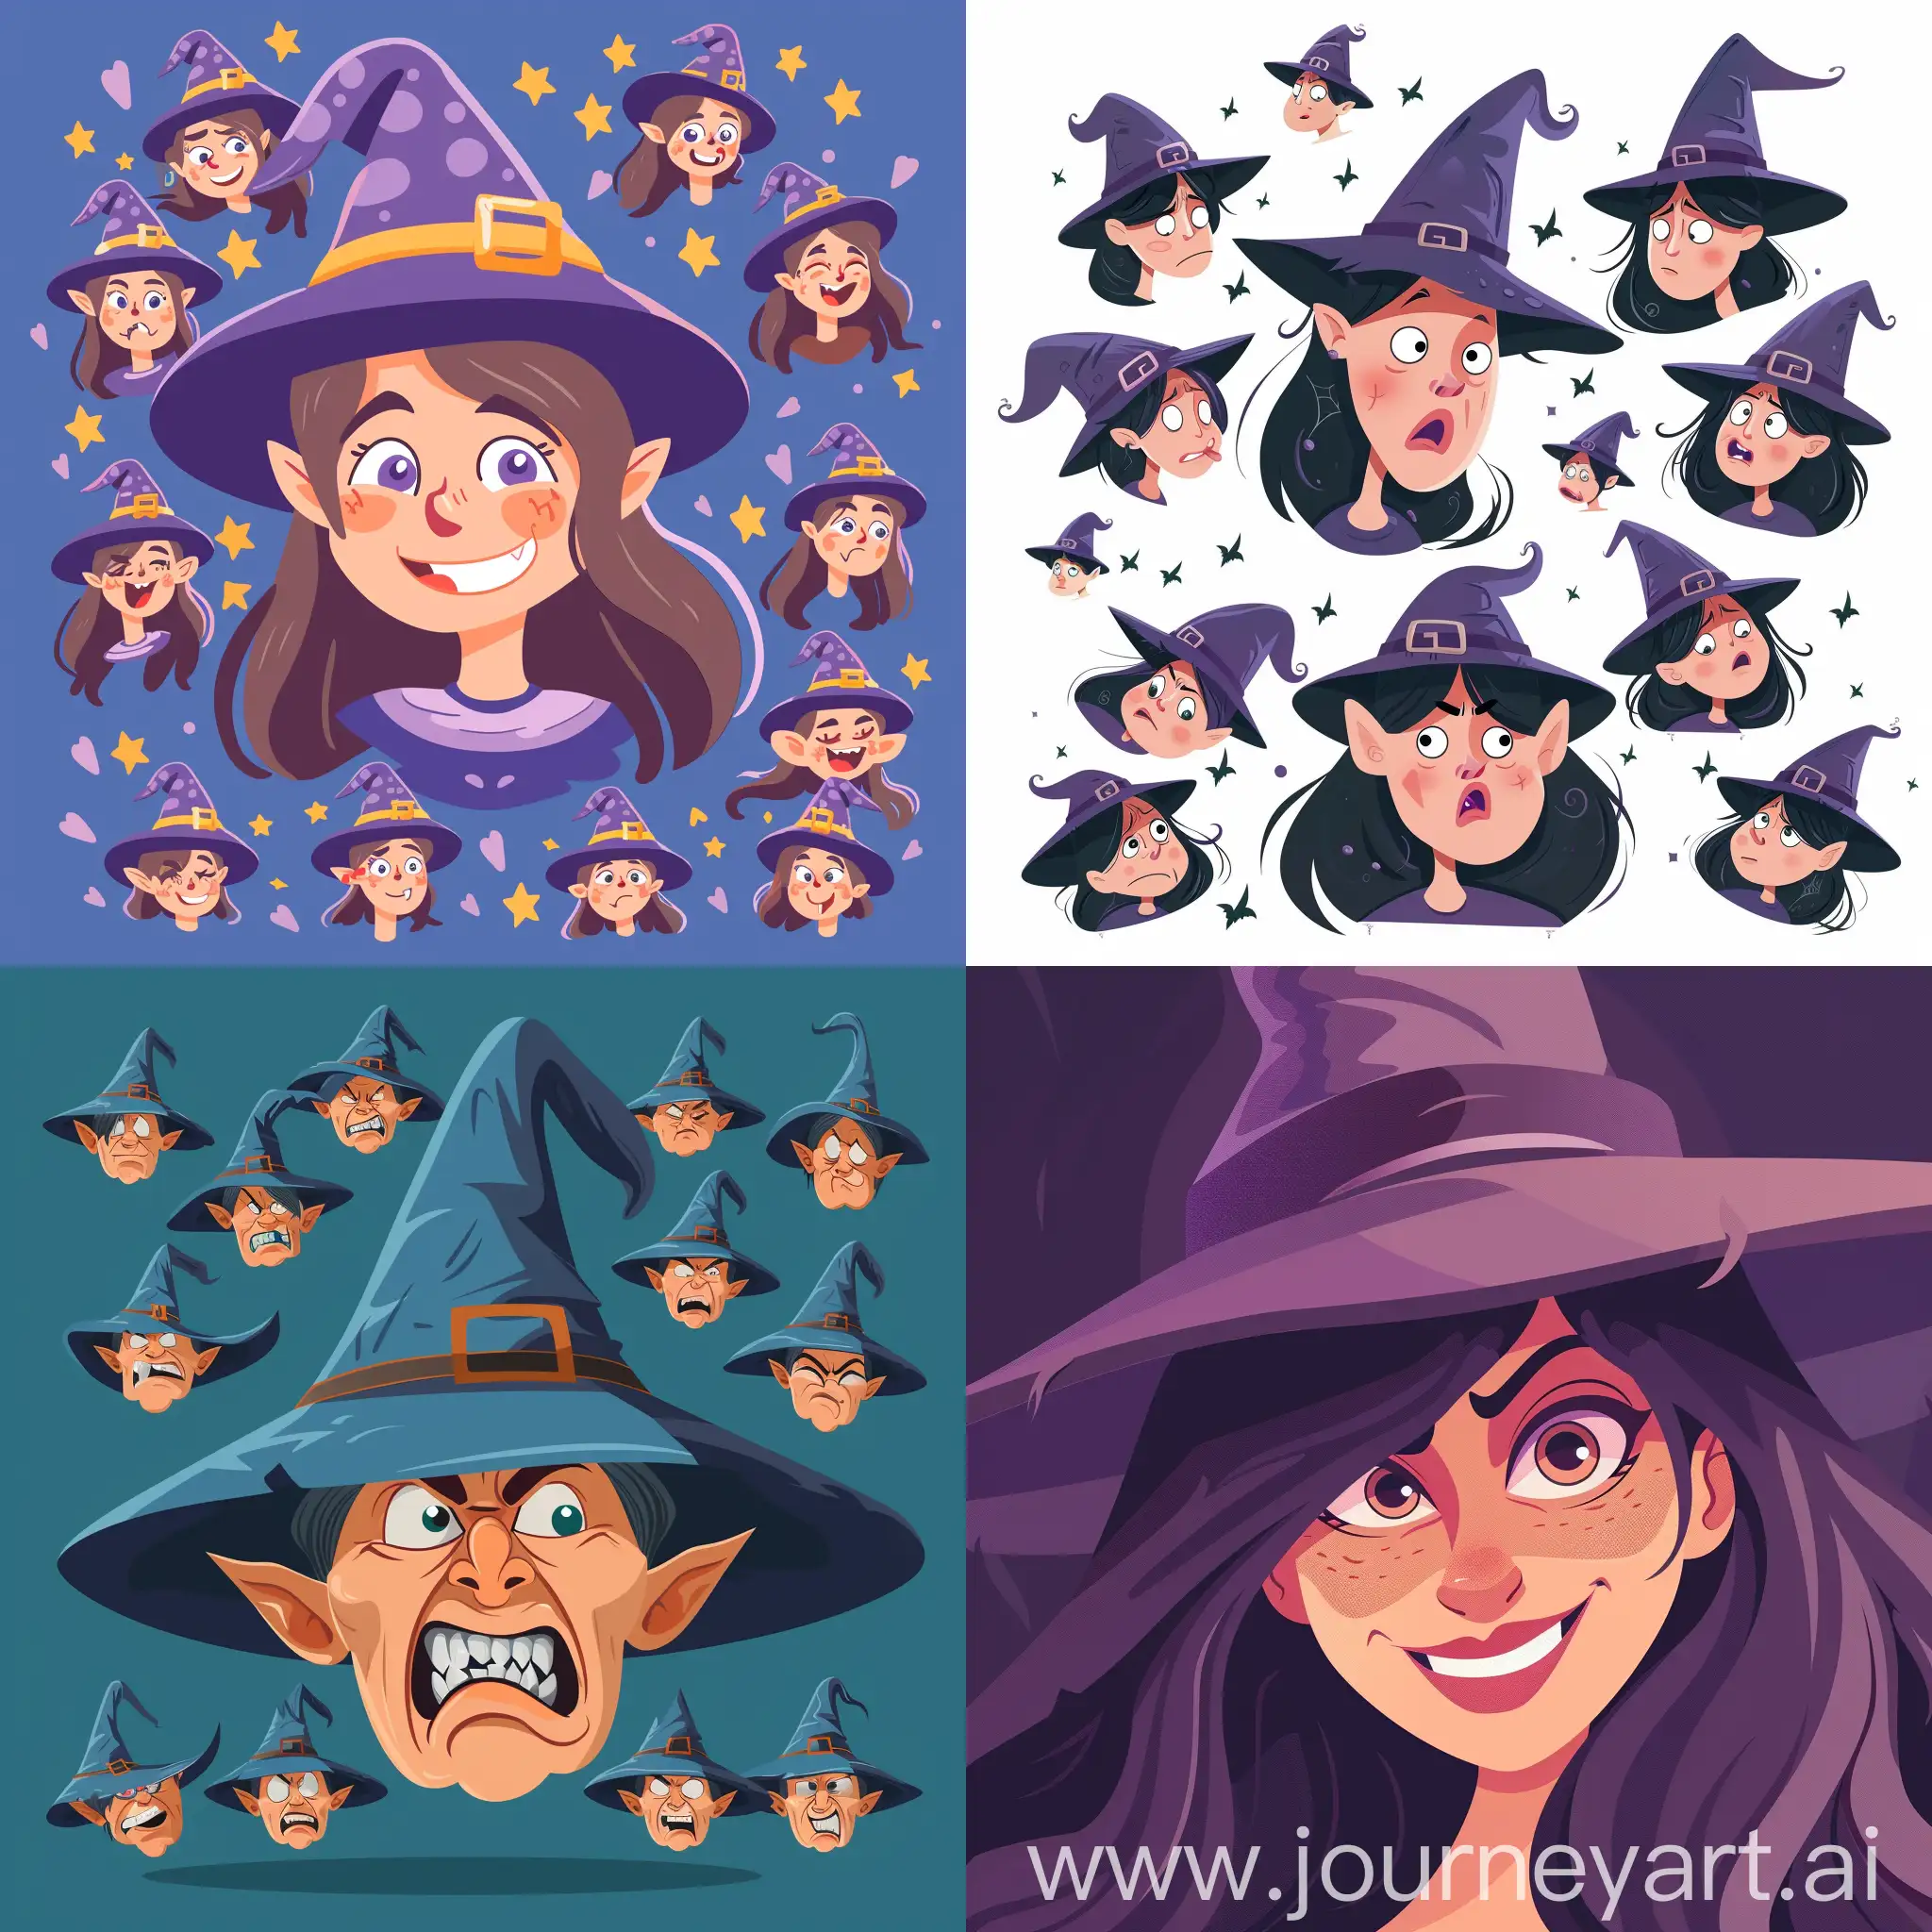 Funny-Witch-Cartoon-Character-with-Varied-Emotions-in-High-Quality-Flat-Style